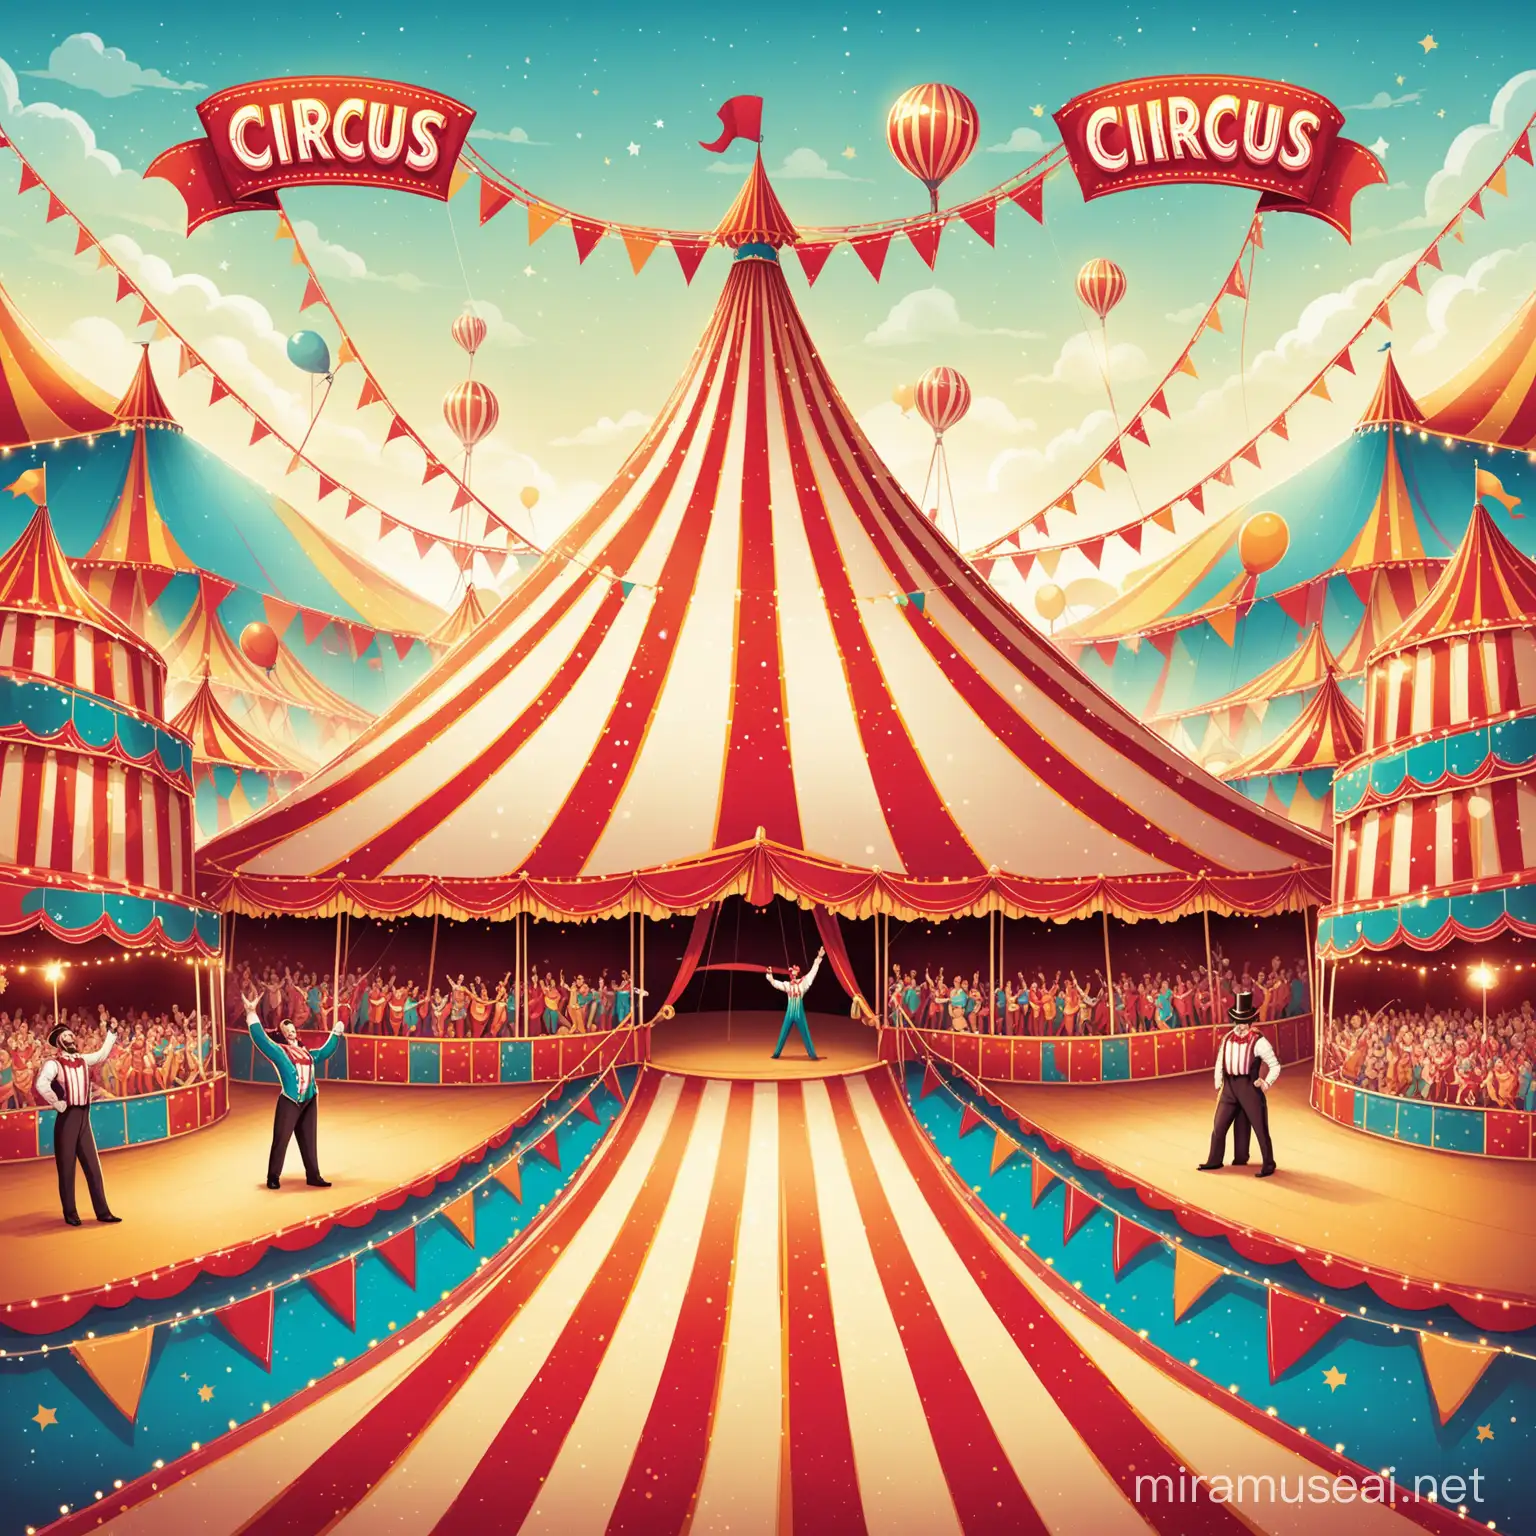 Create a illustration of an advertisement of a circus coming to a town near you